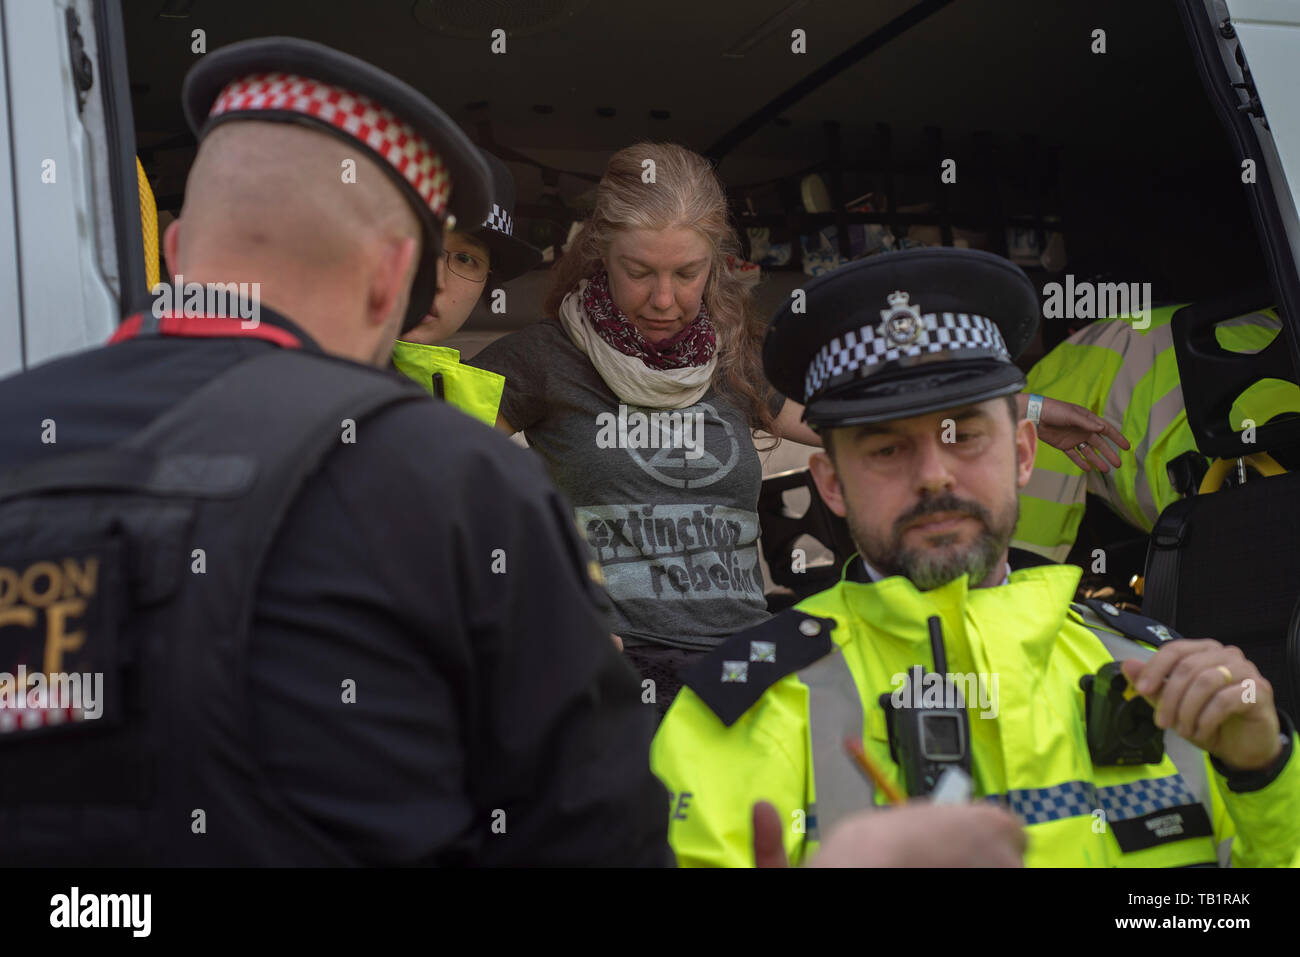 Lady/woman extinctiion rebellion protestor ,arrested and being searched in a police van , London, climate protestor Stock Photo